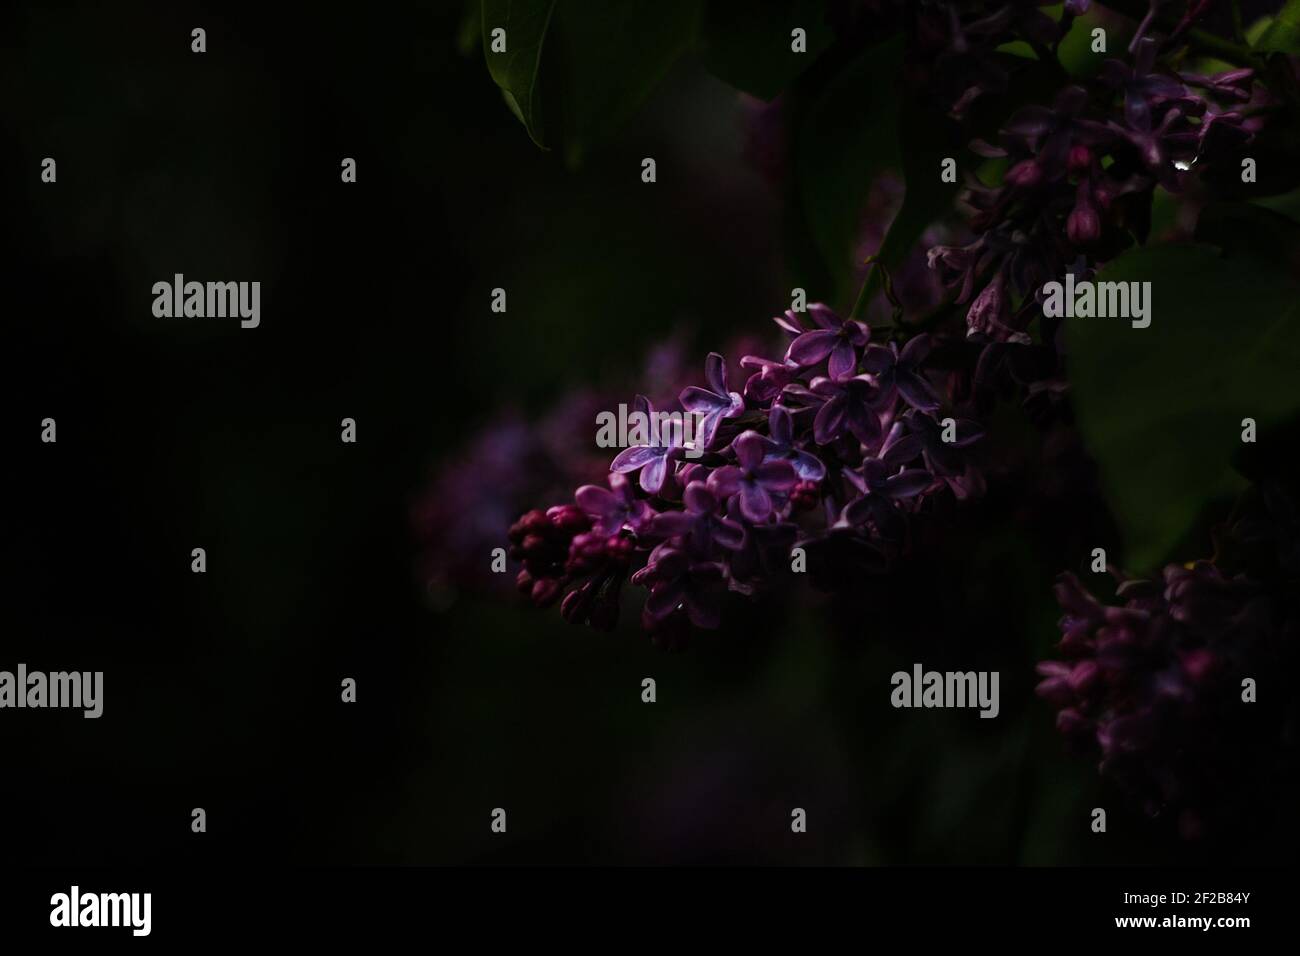 A bunch of purple-pink wet lilacs with a drop of water in the general plan in the dark. Dark blurred black and green background. Mystical romantic Stock Photo